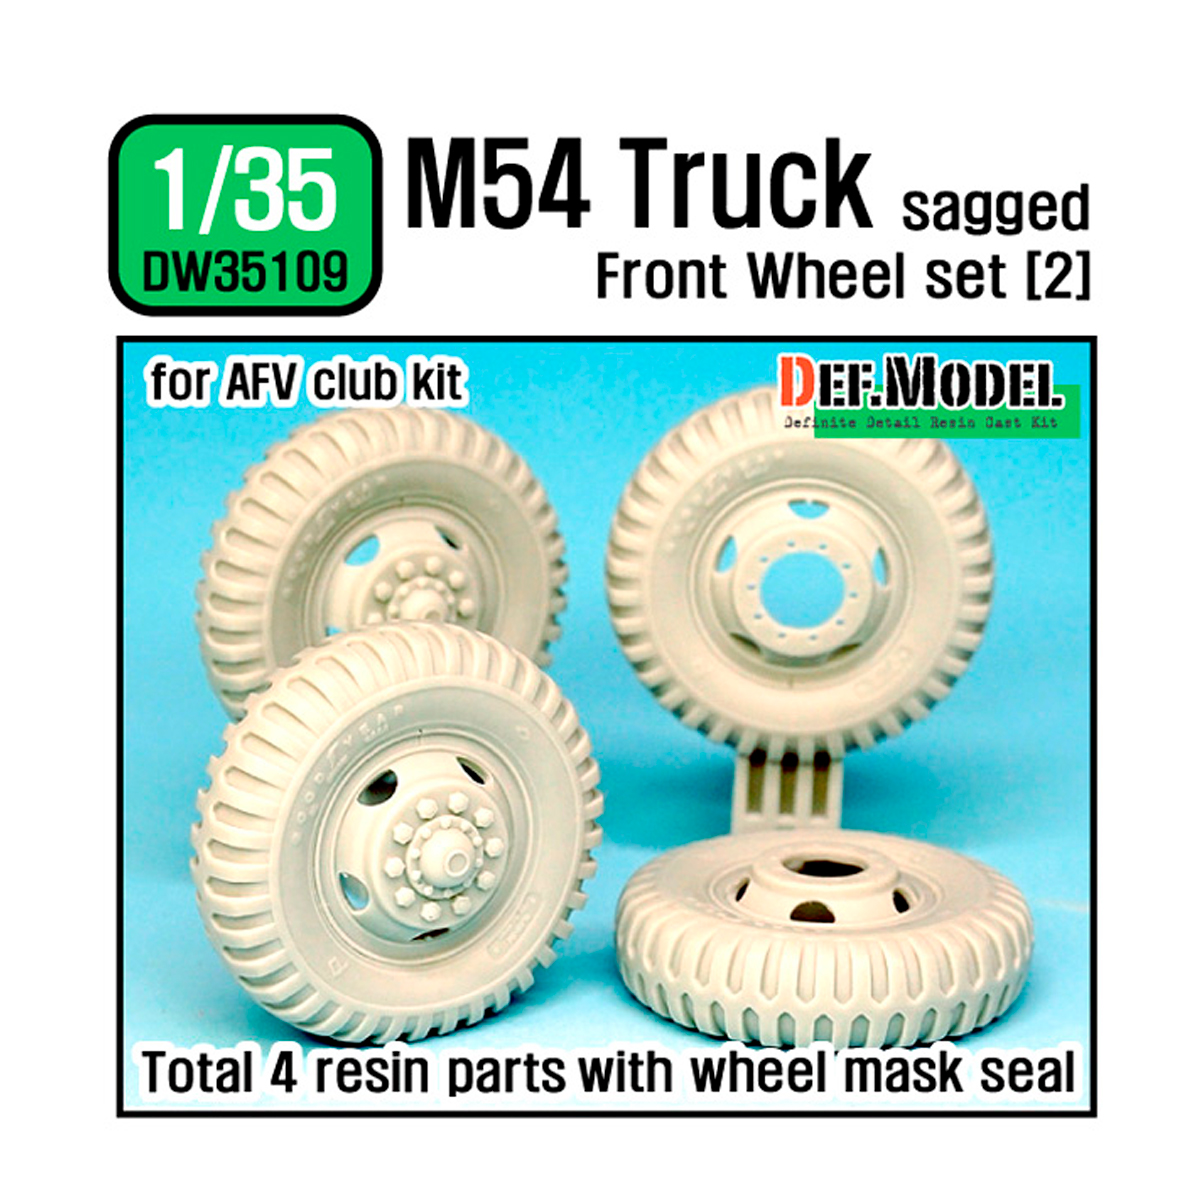 US M54A2 Cargo Truck Sagged Front wheel set)2)- Military type( for AFV club 1/35)